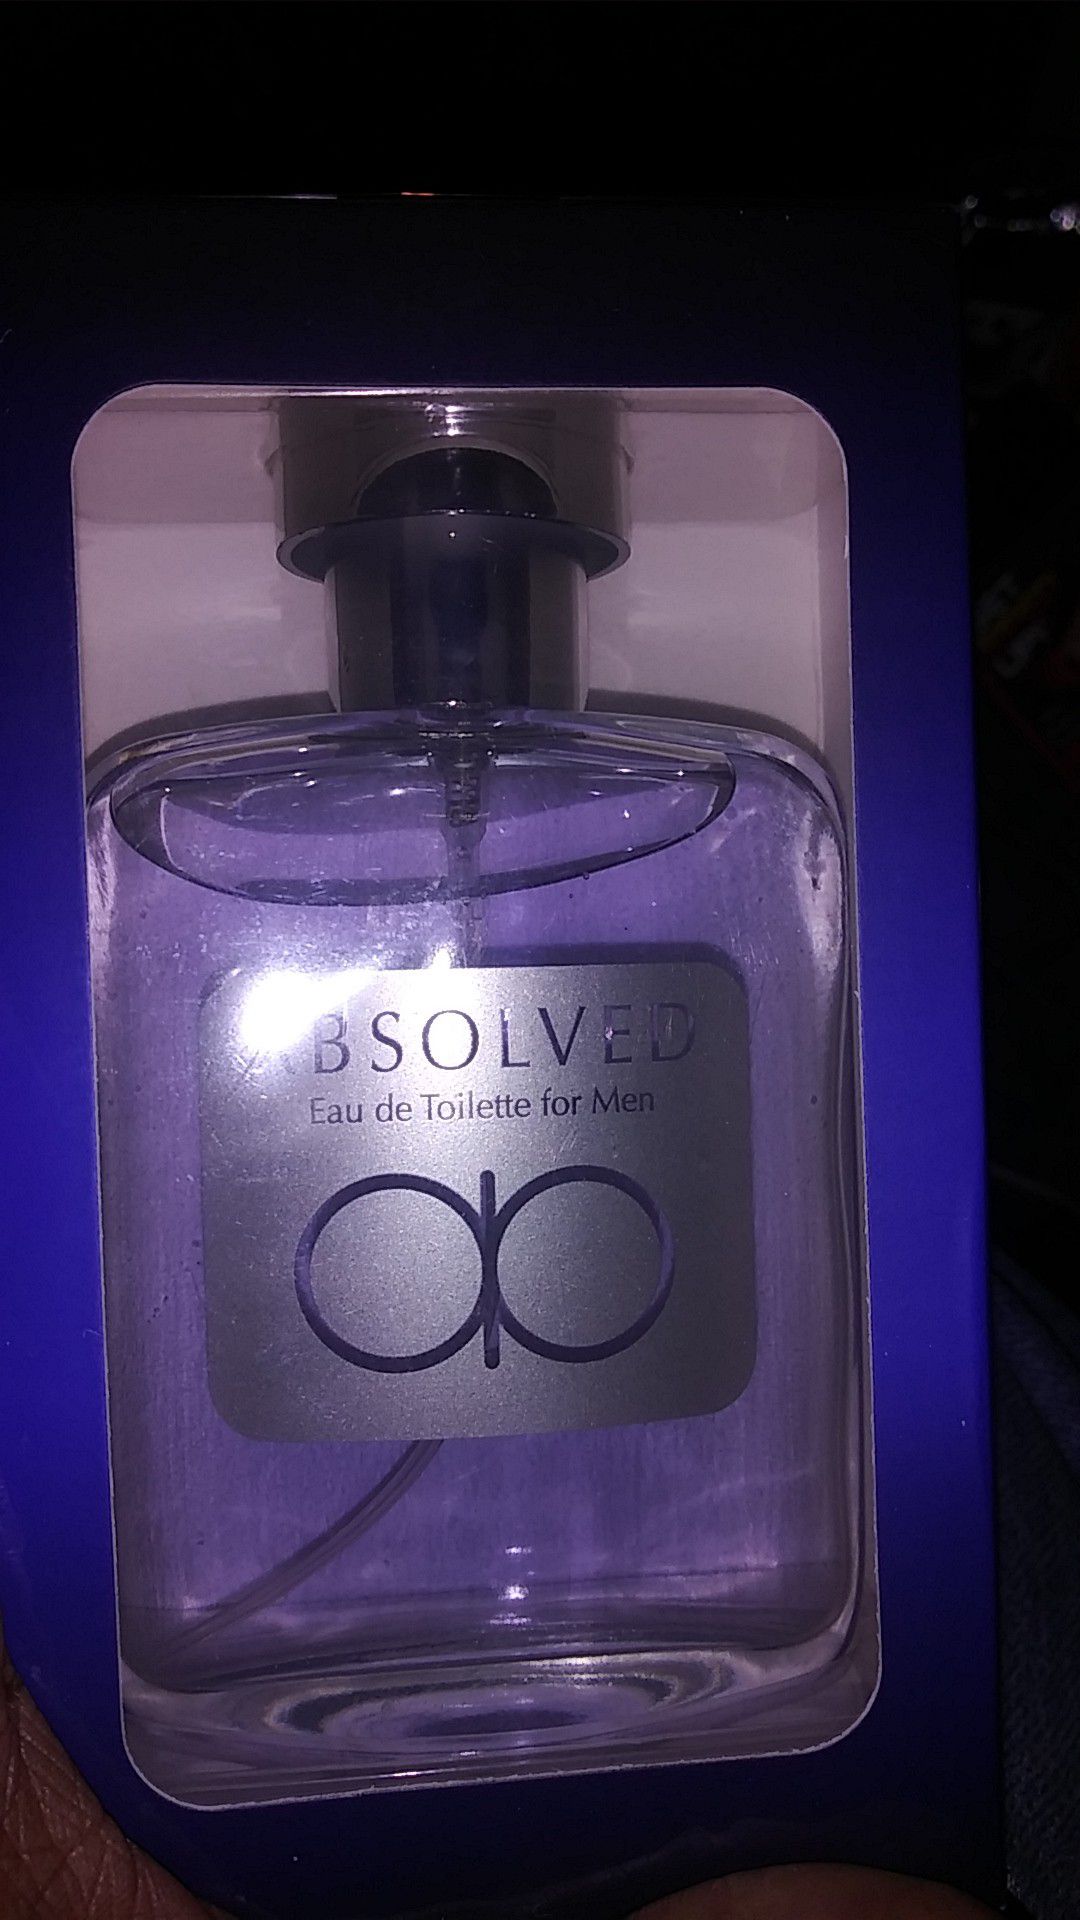 Absolved men's cologne for Sale in Alameda, CA - OfferUp